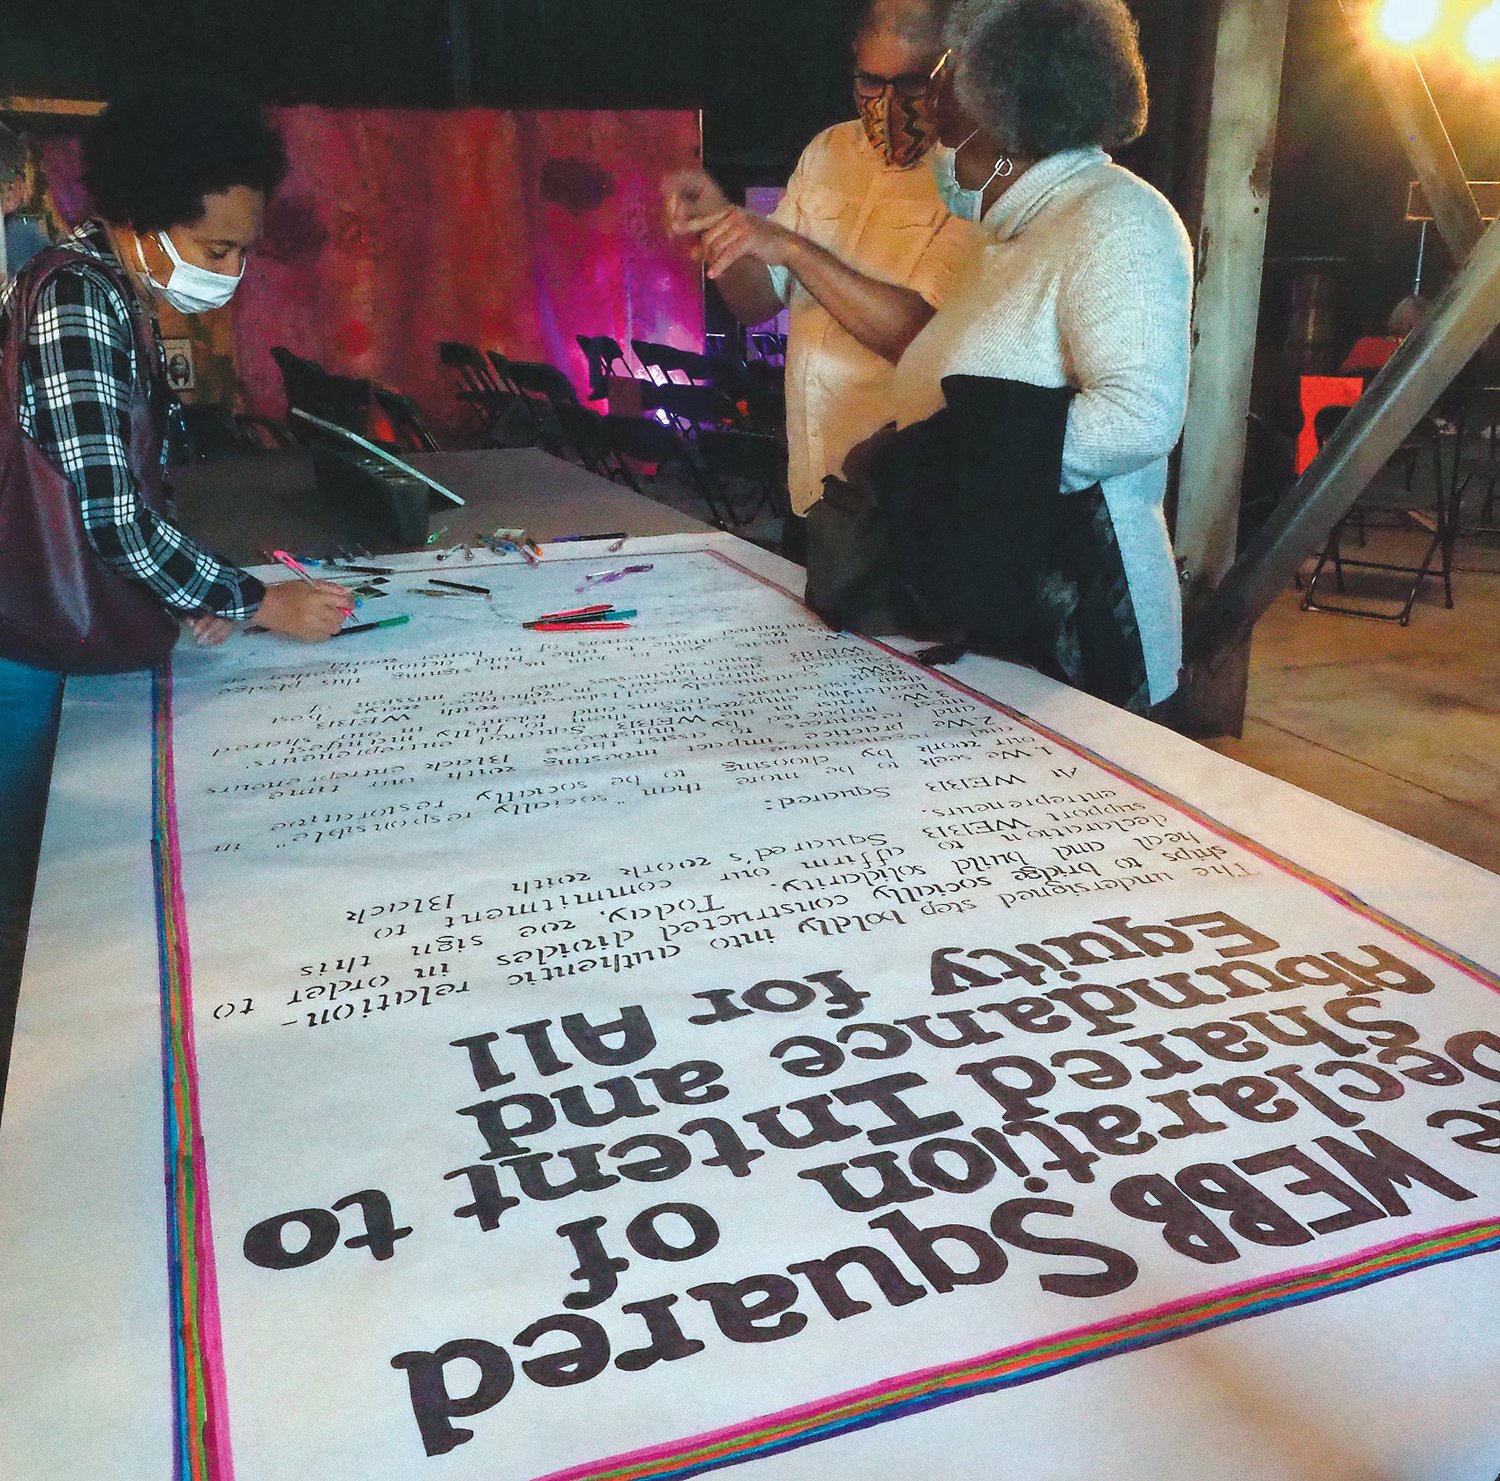 Attendees at the WEBB Squared launch party  could sign 'the scroll' to pledge support for abundance and equity for all.